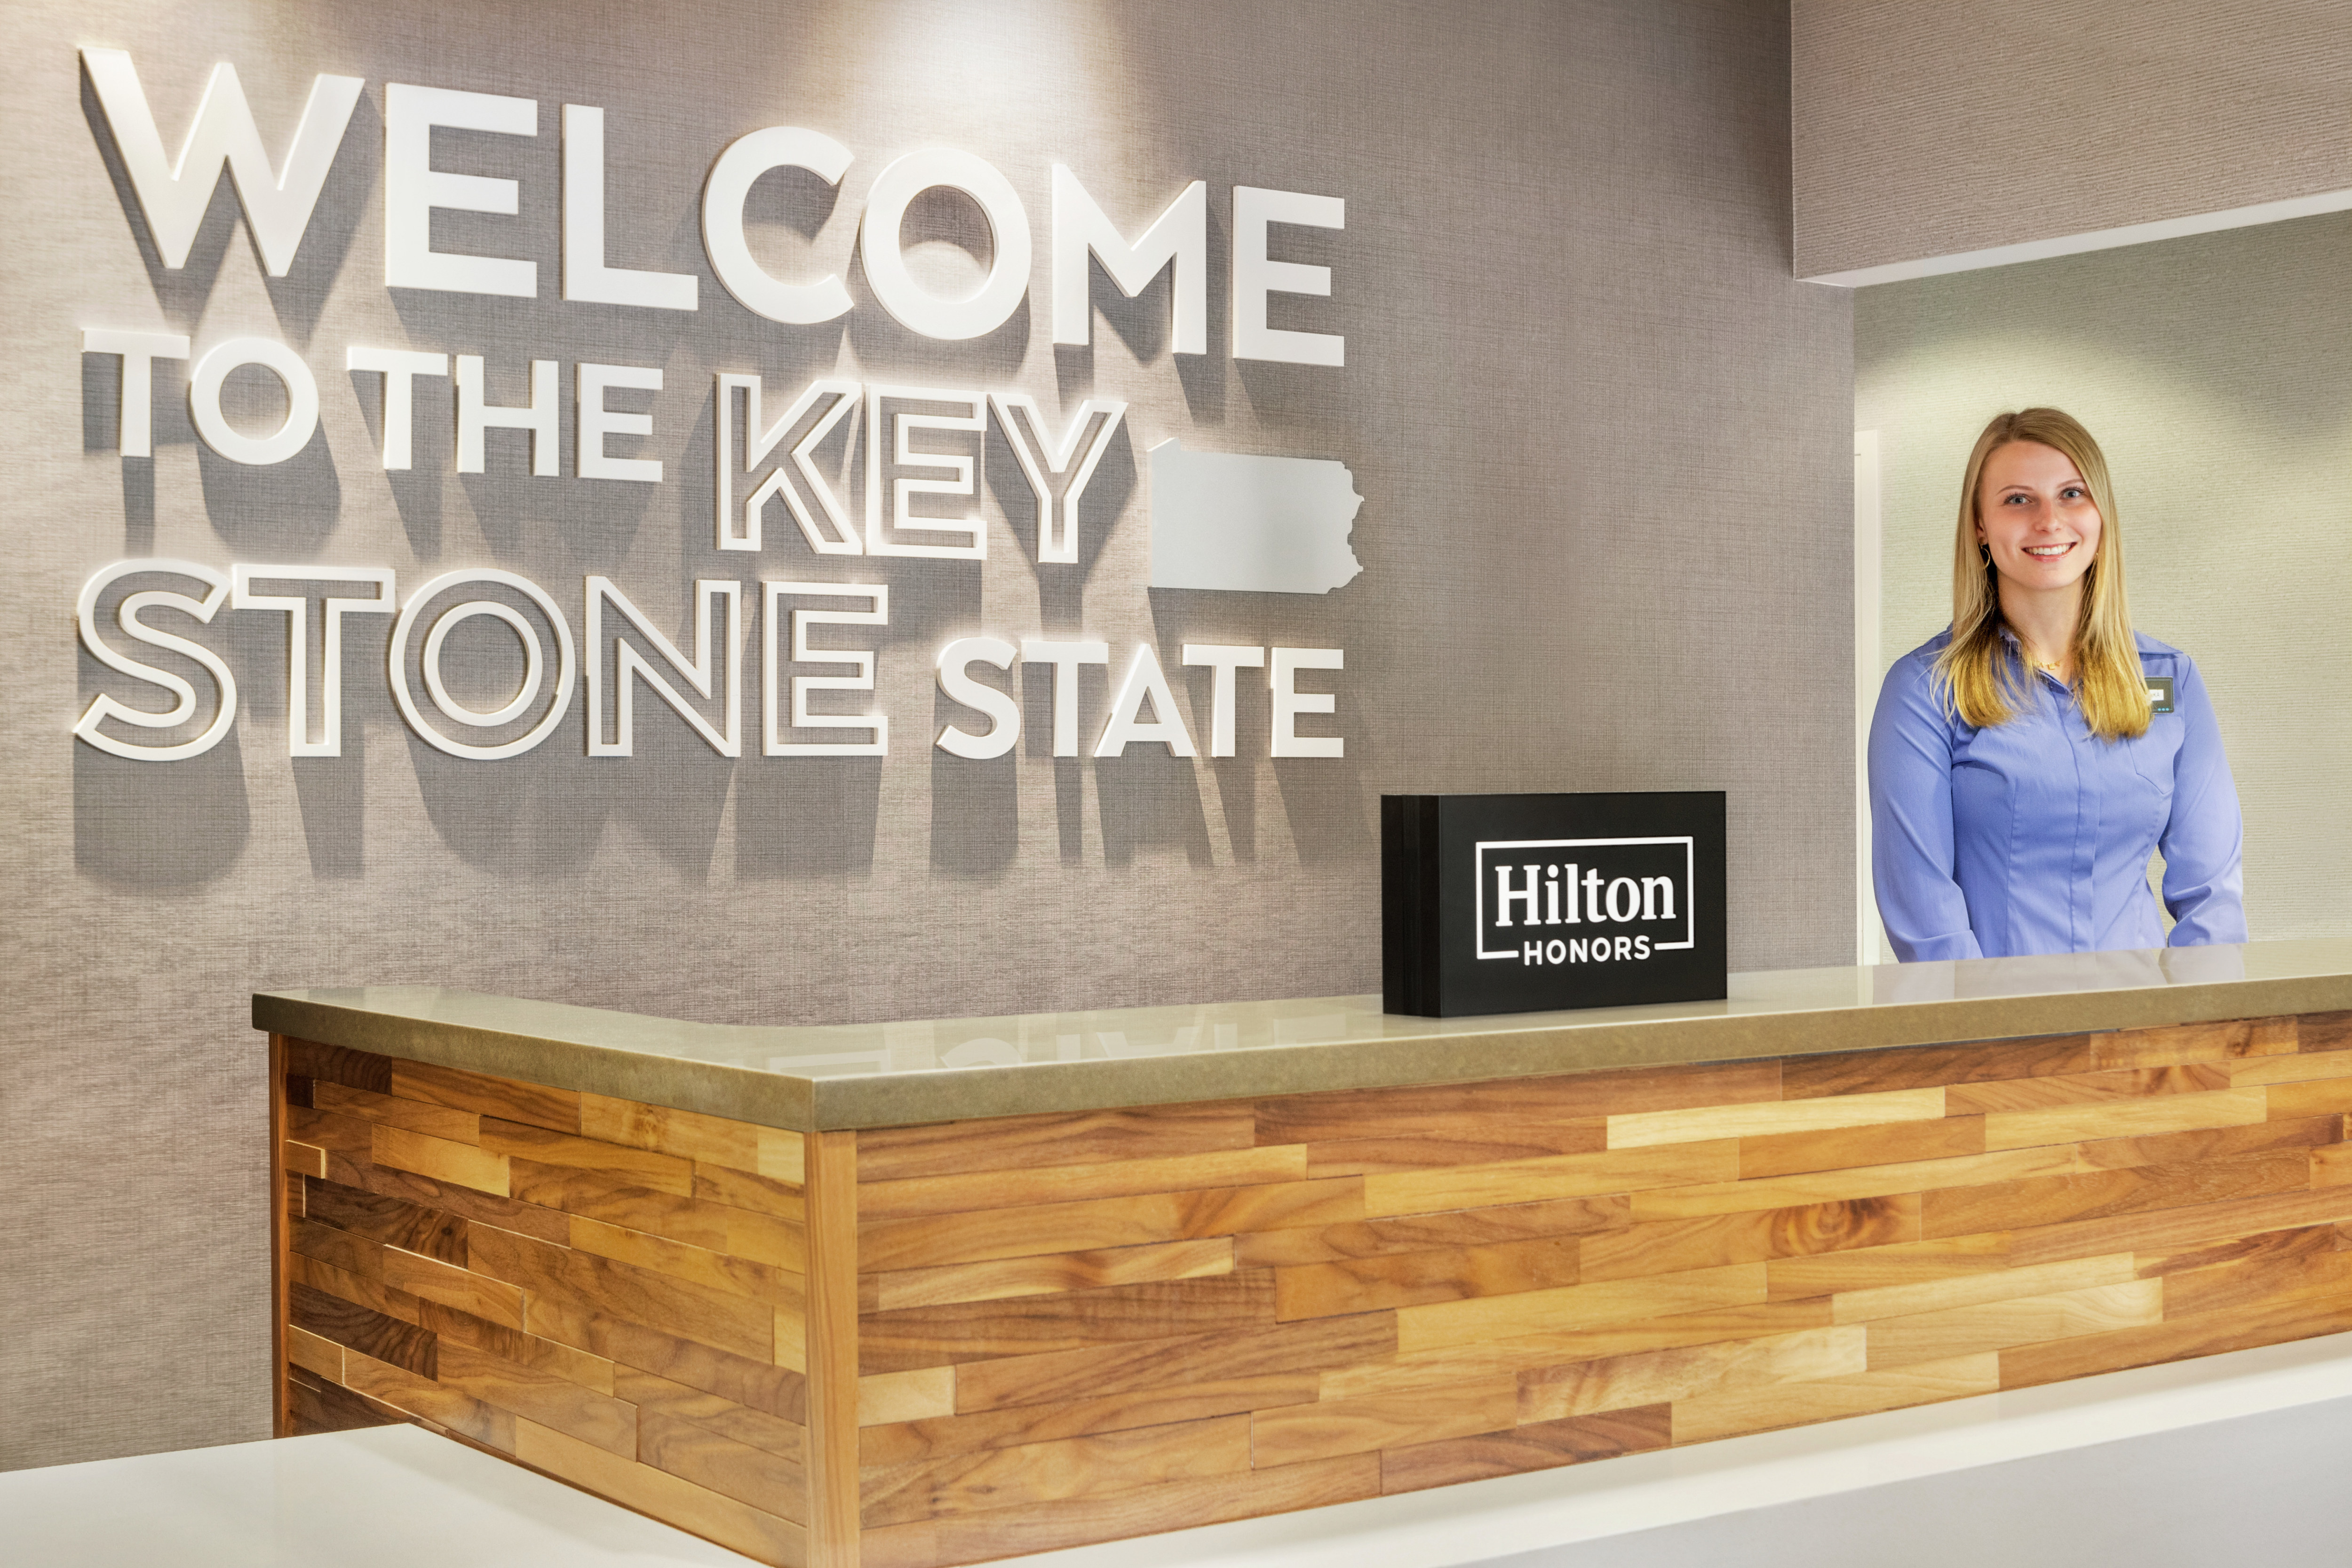 Bright and inviting hotel front desk, featuring Key Stone State wall art and welcoming hotel staff member